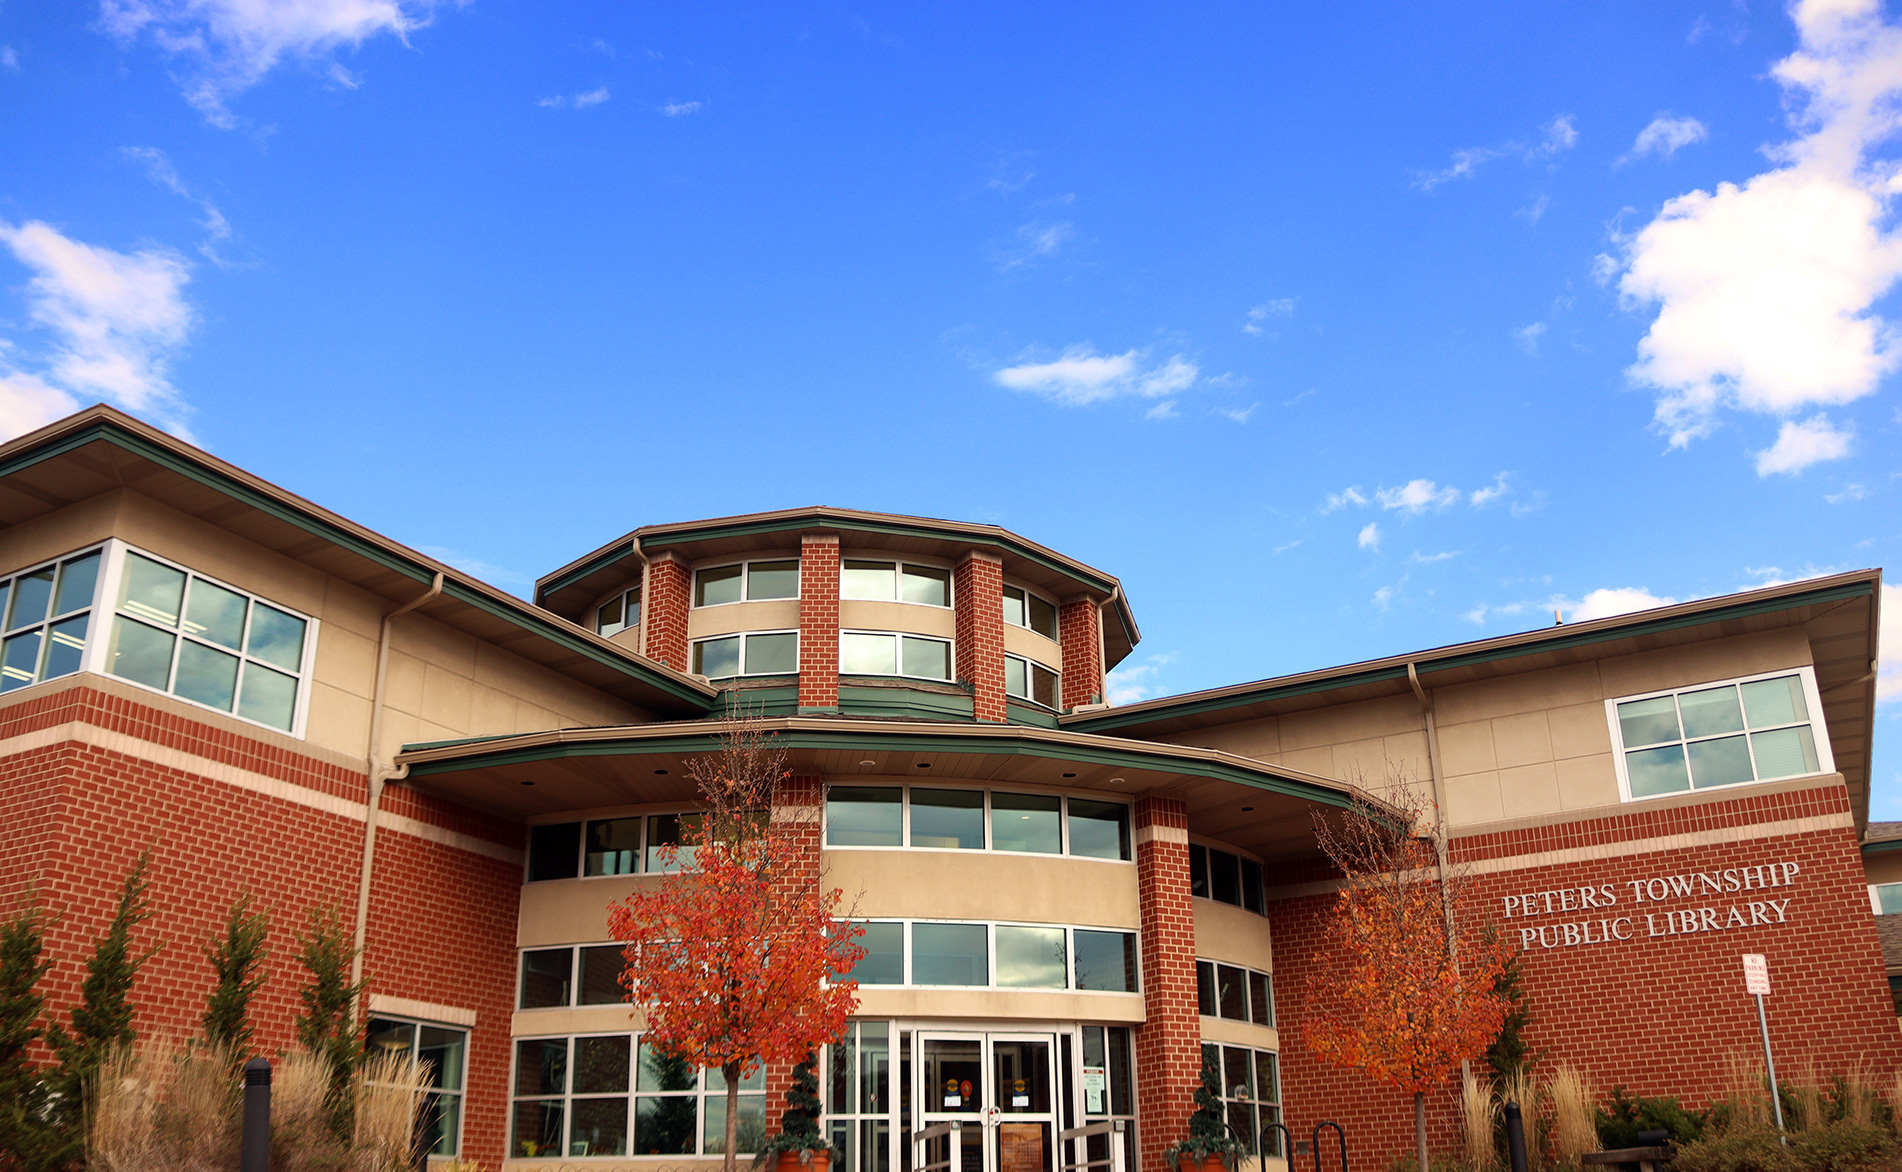 Peters Township Public Library